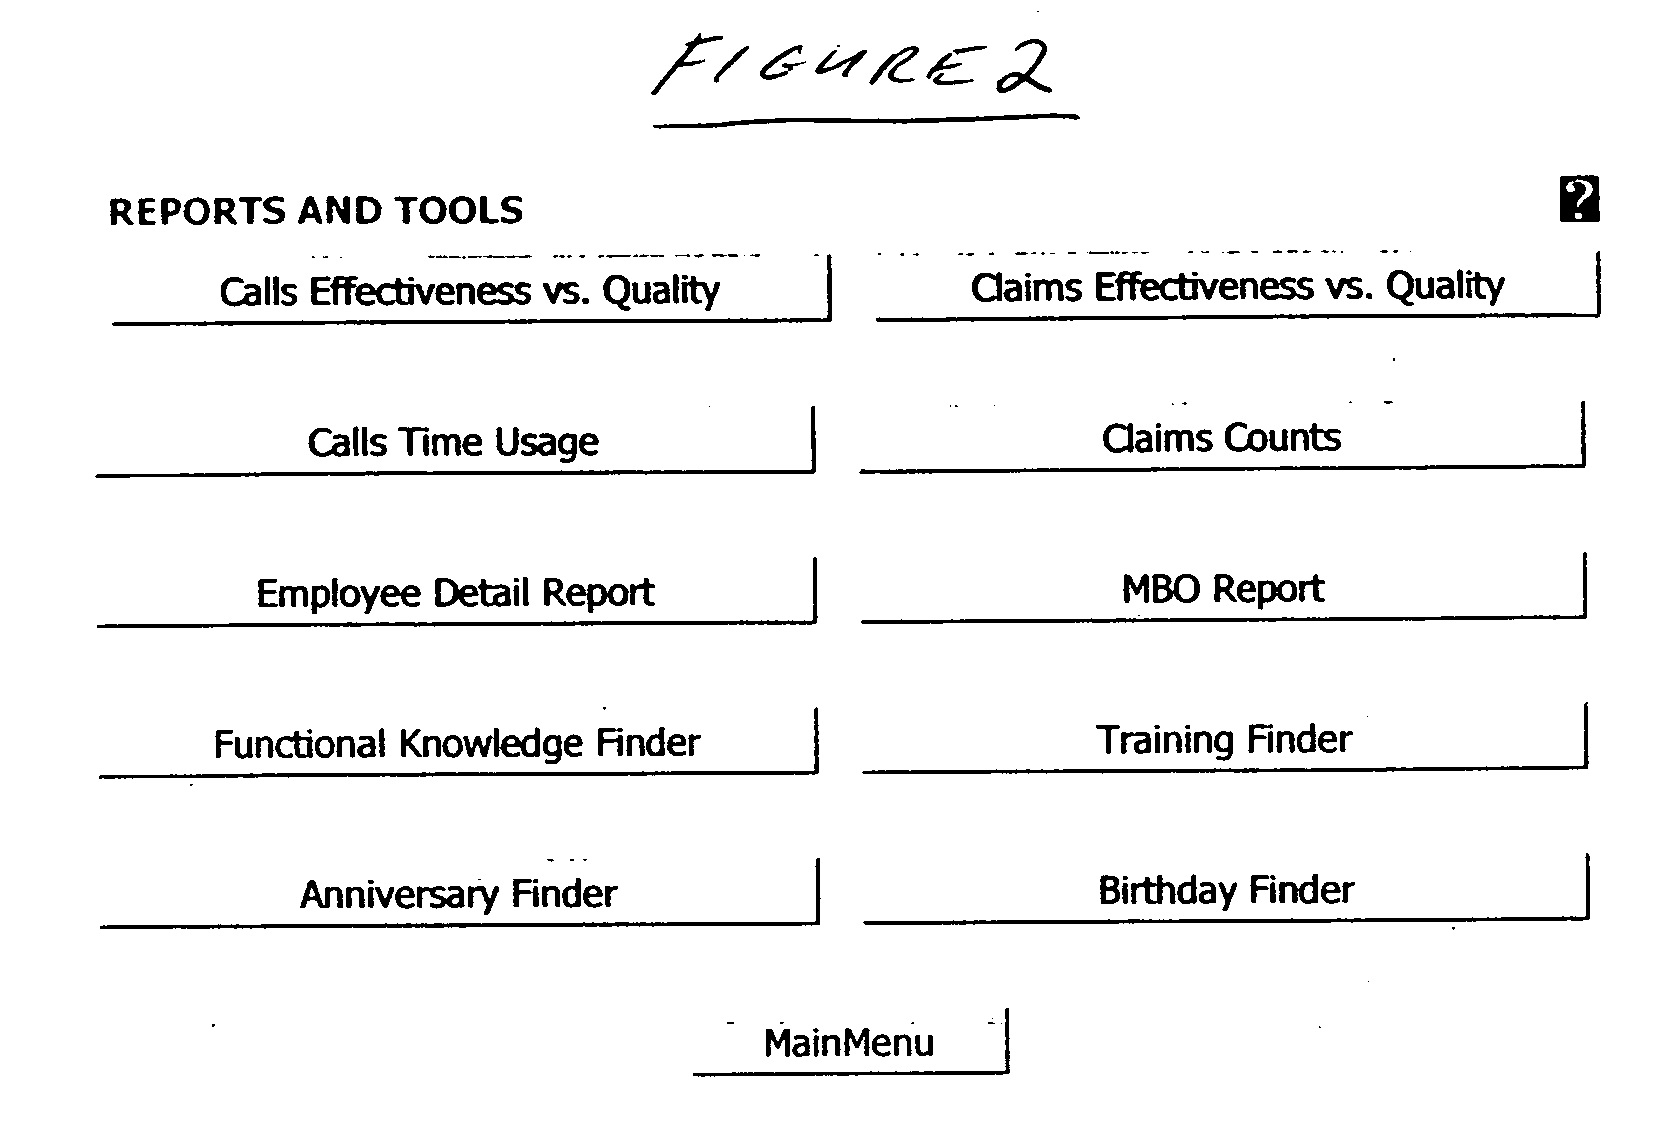 Computer-implemented apparatus and method for capturing and monitoring employee development and performance in a call center